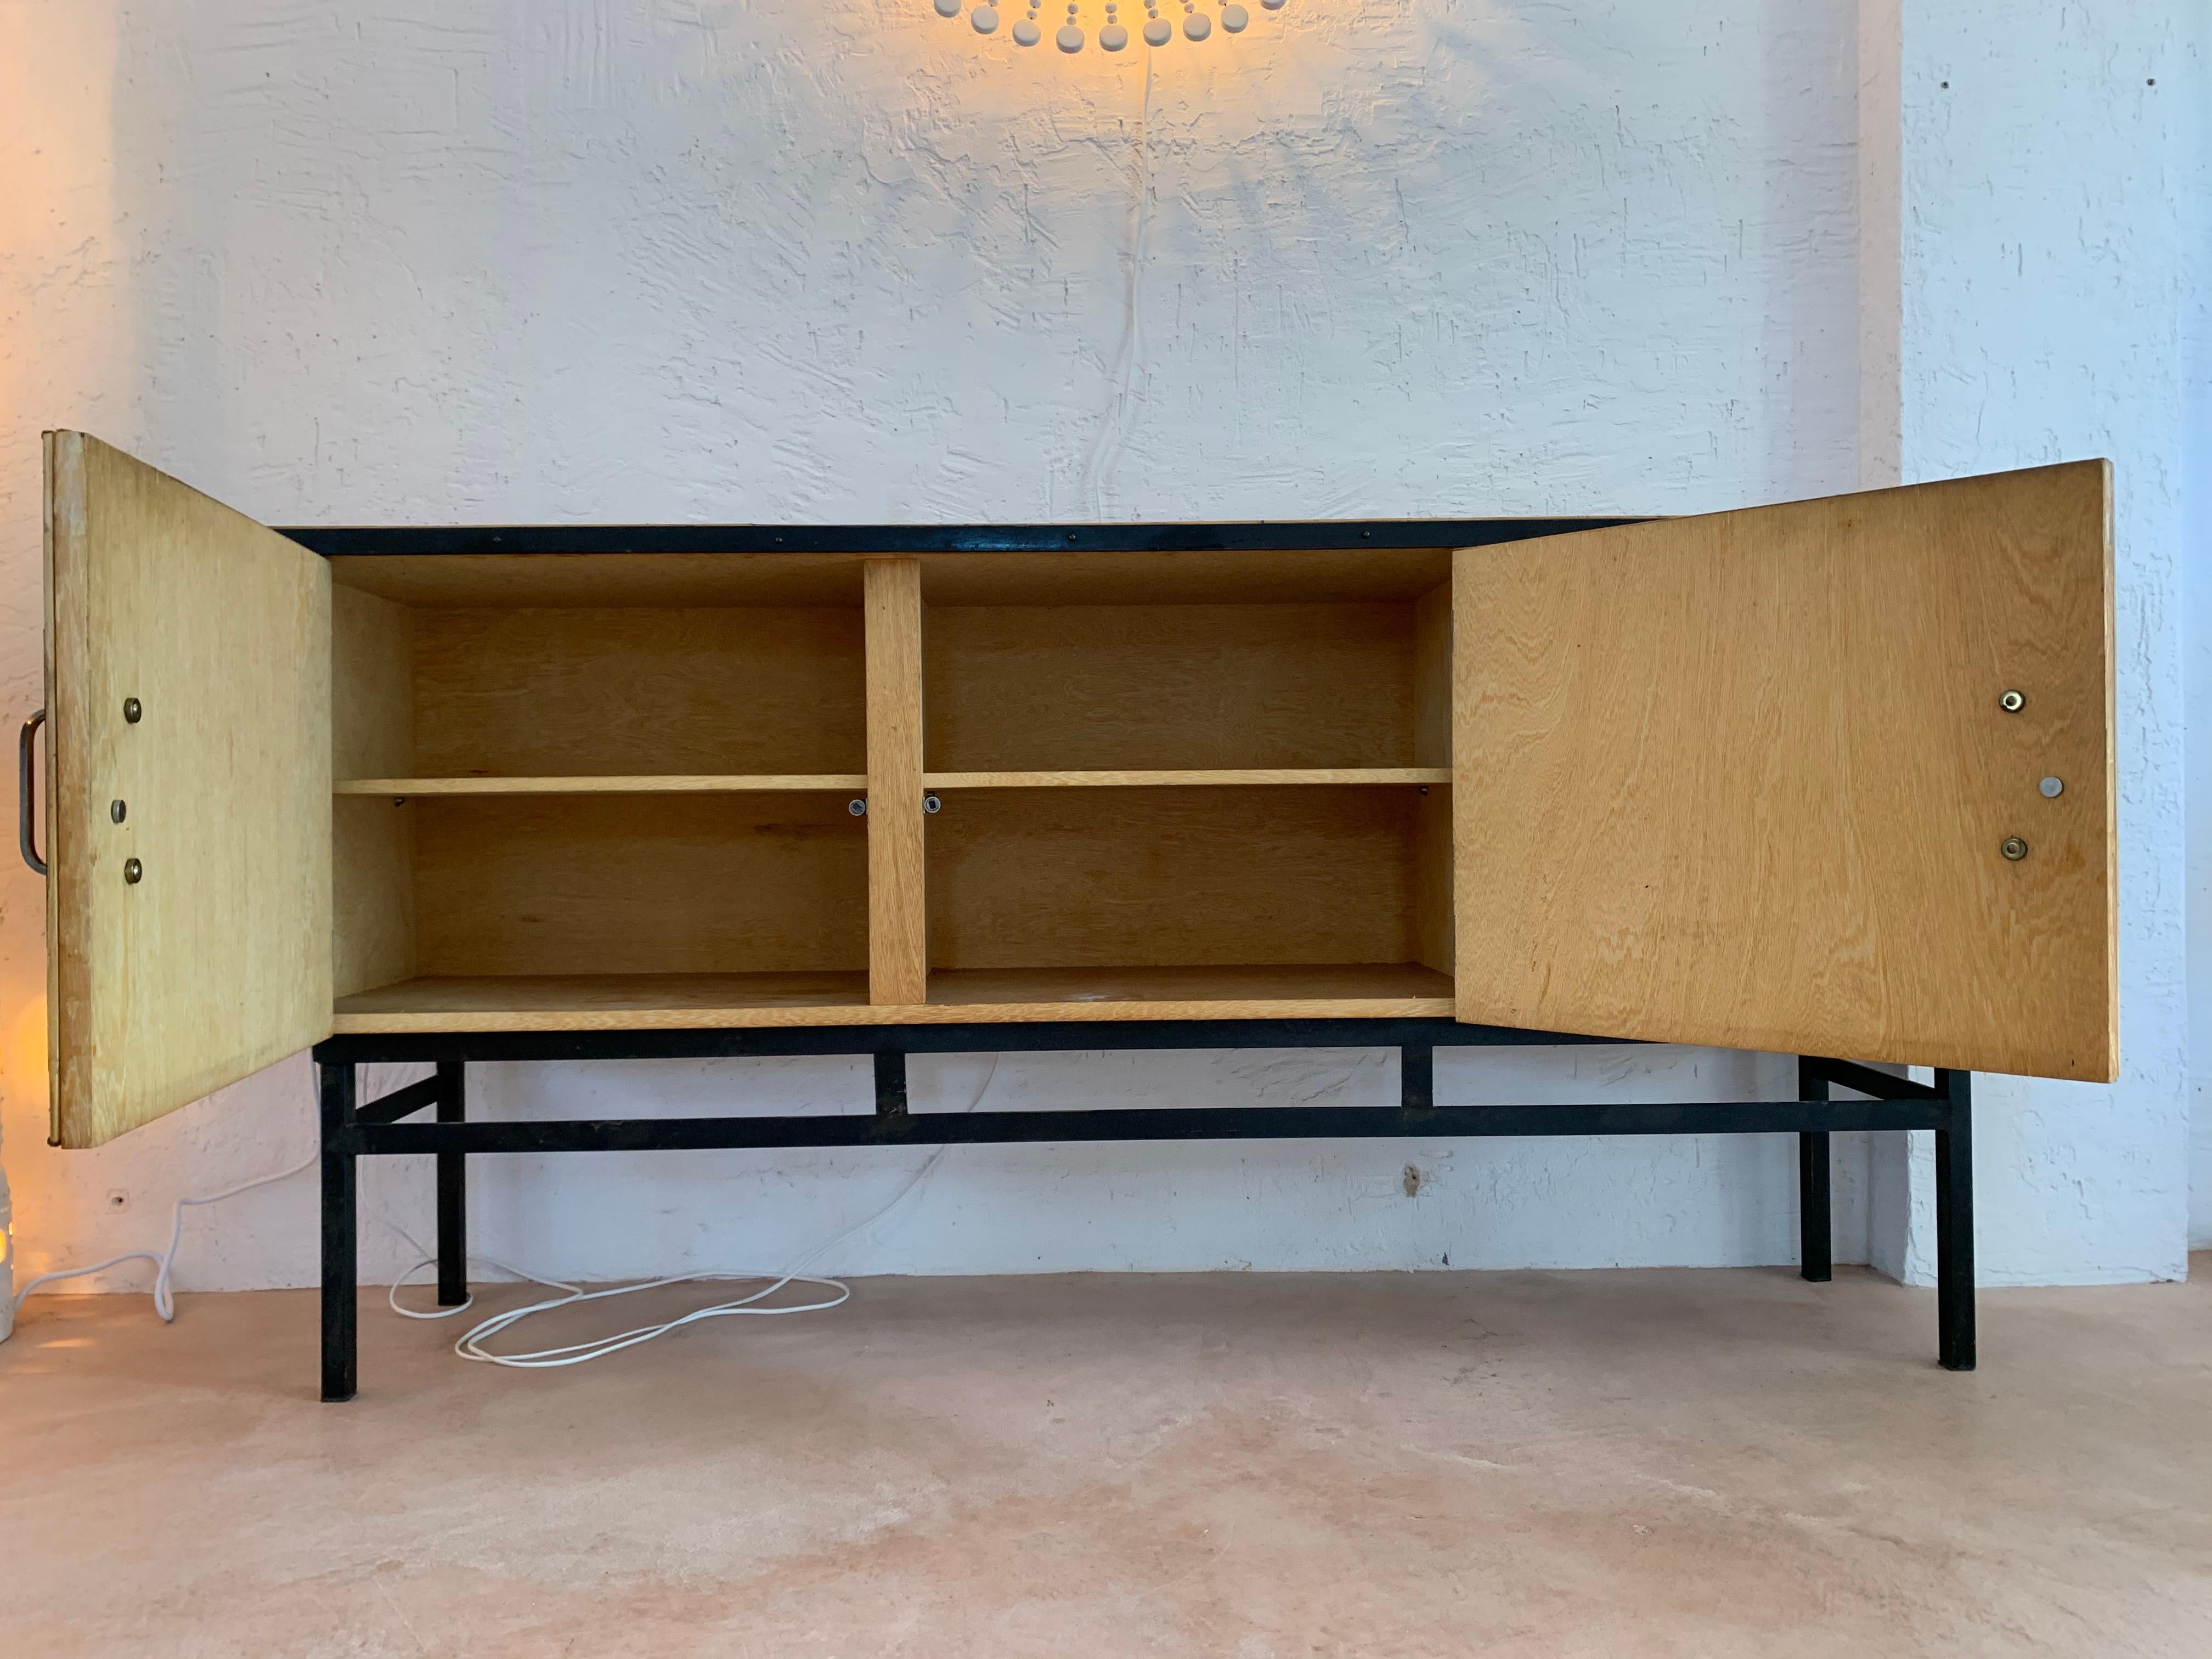 Audoux & Minet with Roger Capron Ceramic Tiles Sideboard in Rattan & metal, 1950 2